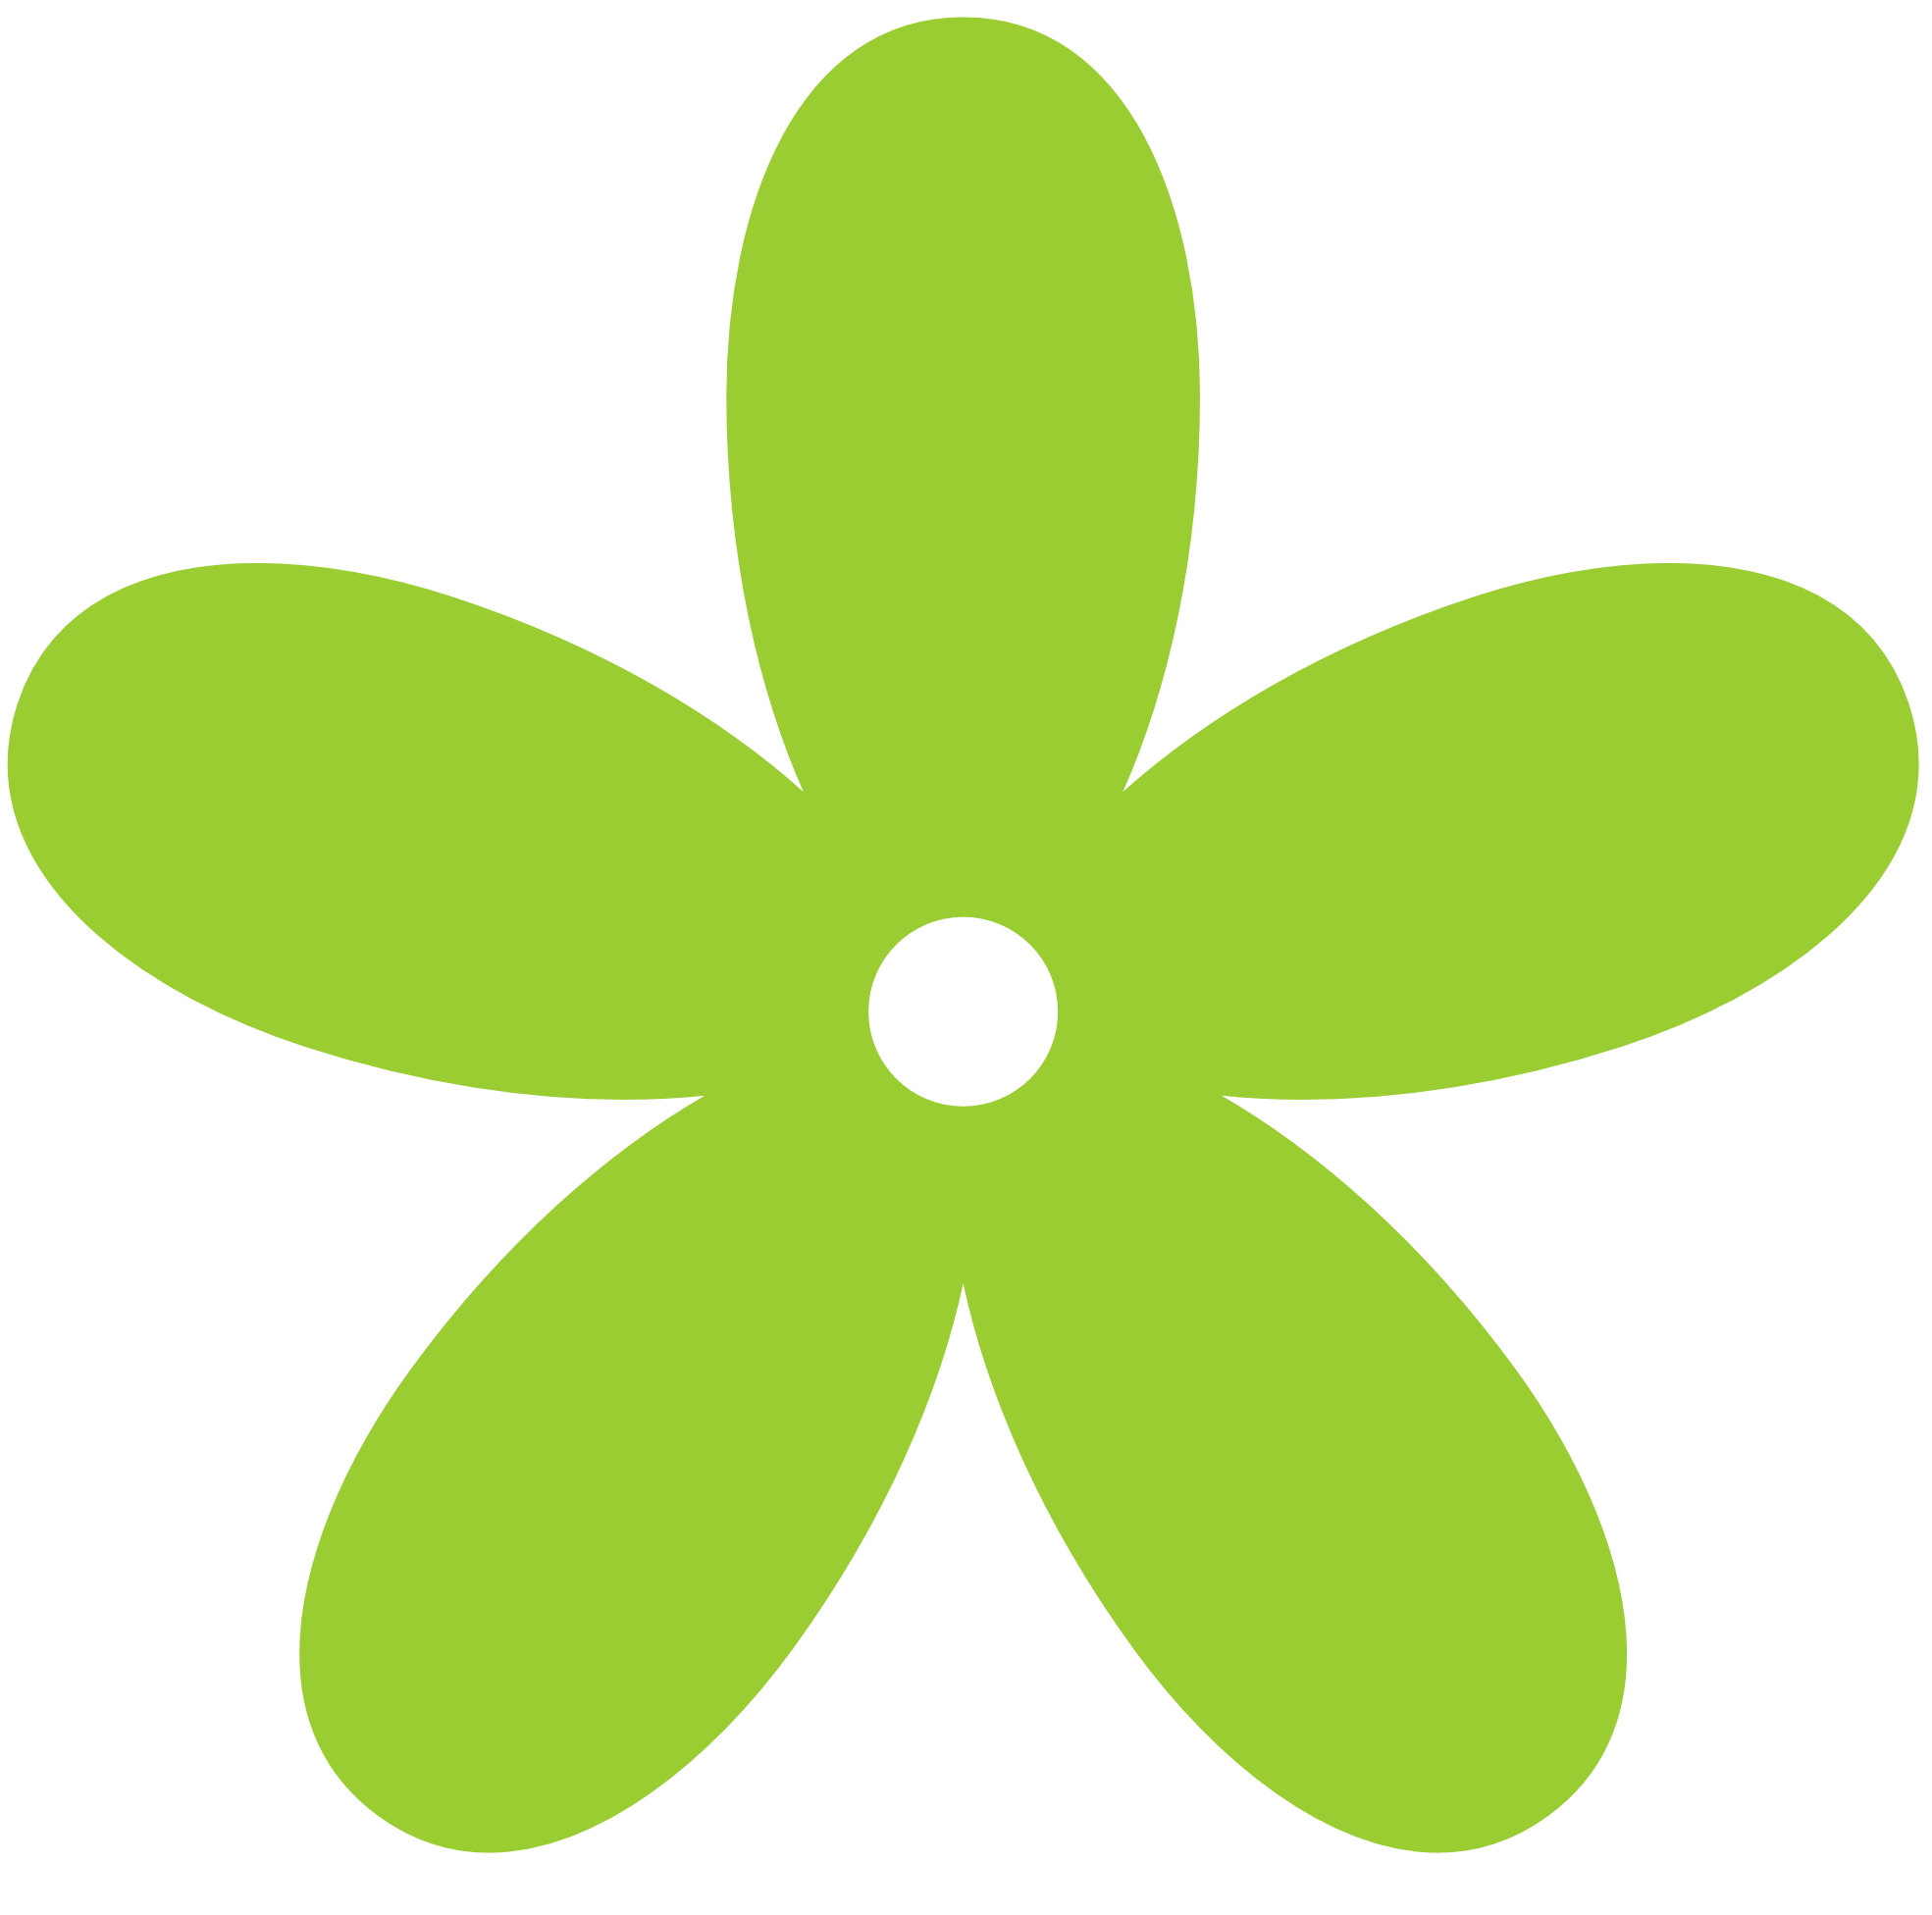 21 Green Flower Clipart Free Cliparts That You Can Download To You